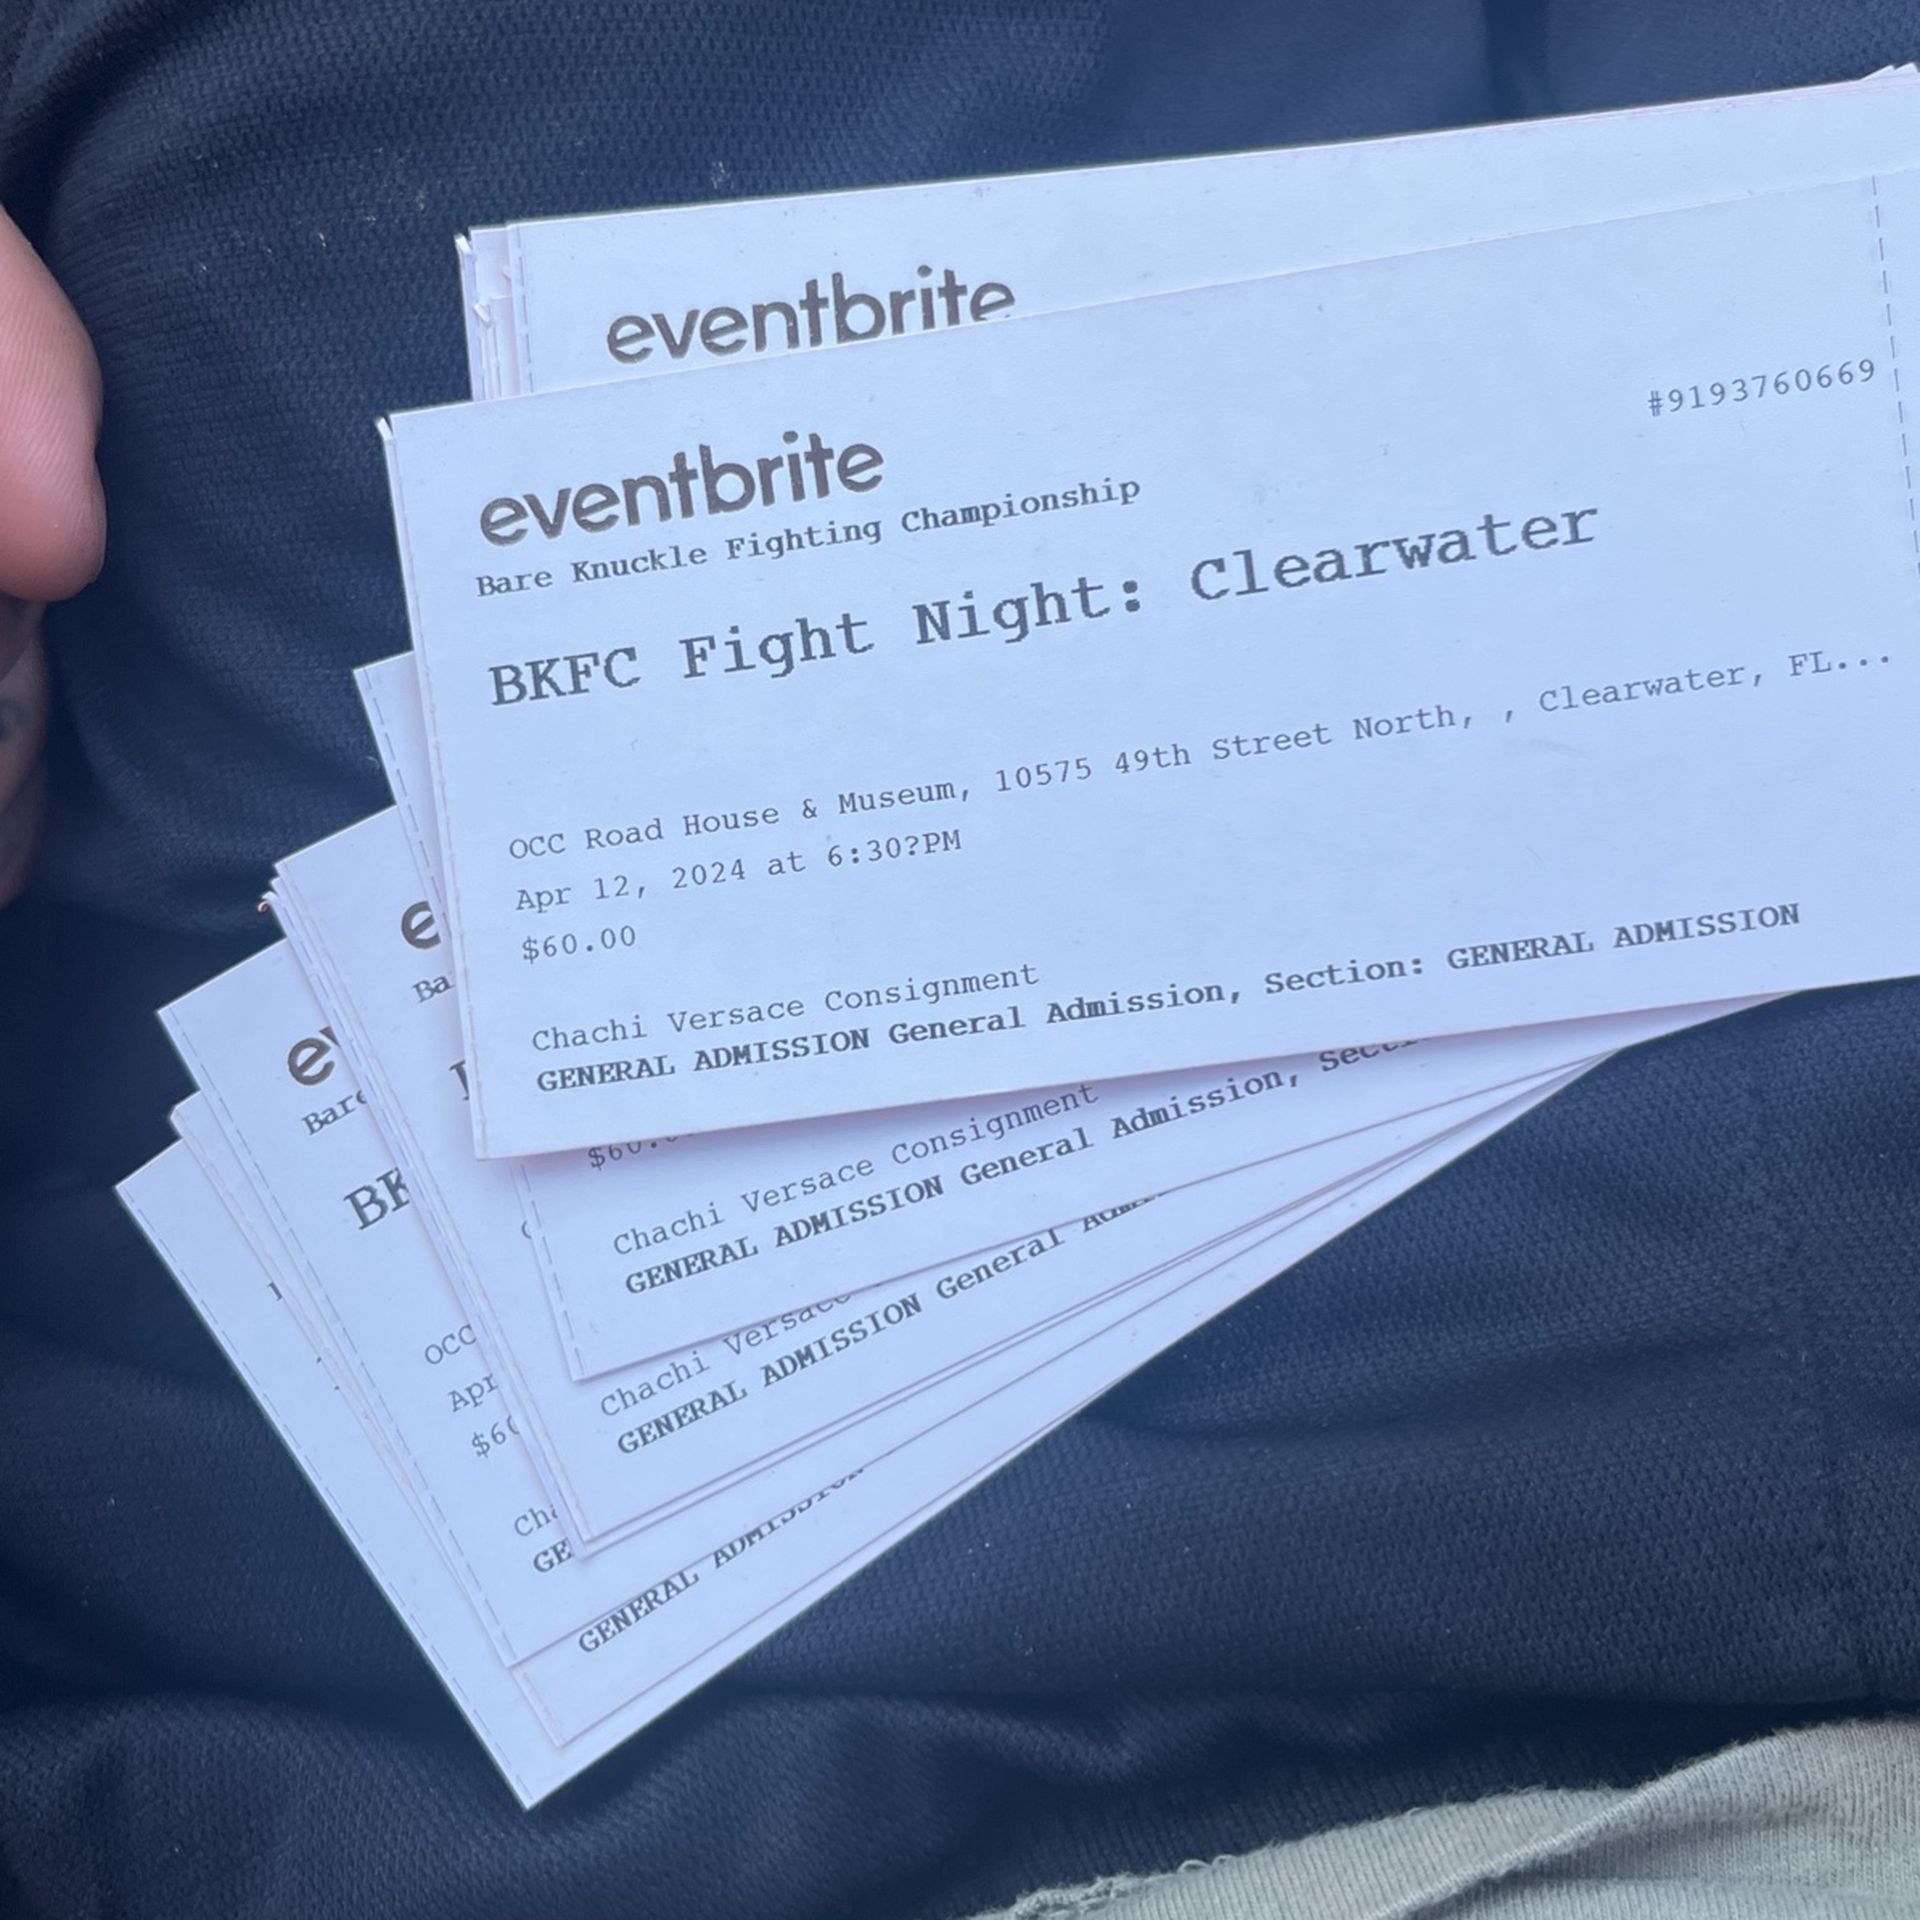 Bare Knuckle Fighting Tickets 